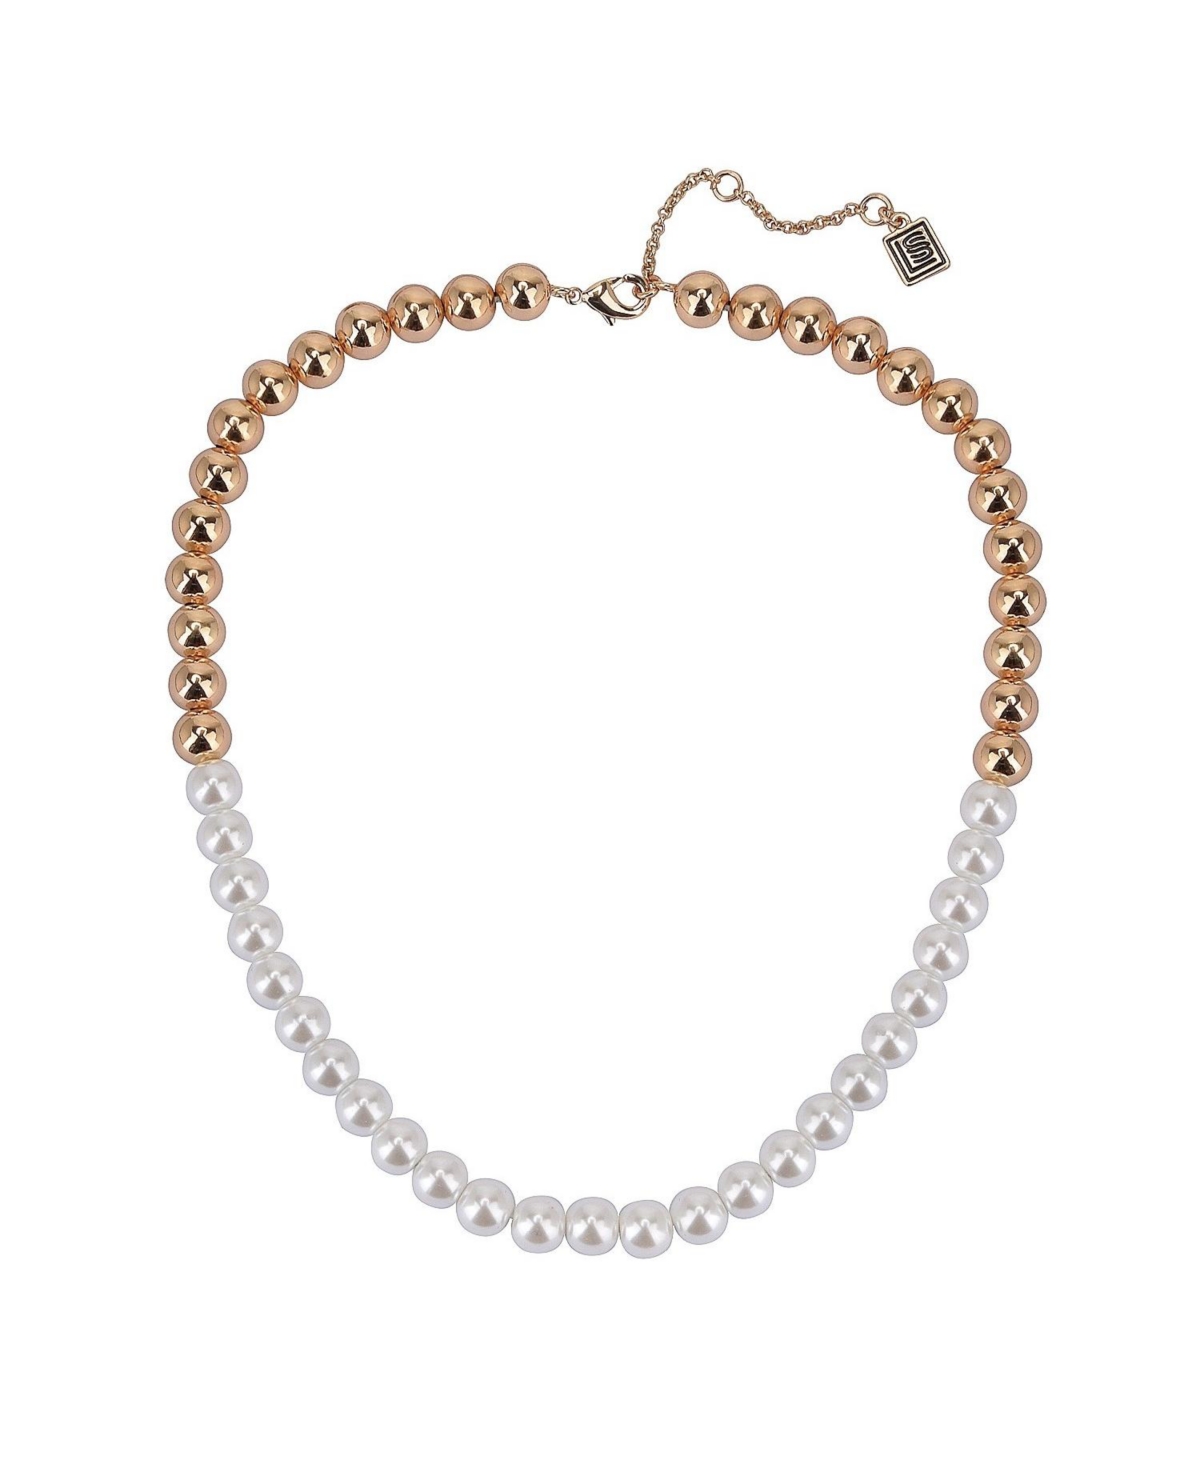 Gold Tone and Pearl Collar Necklace - White